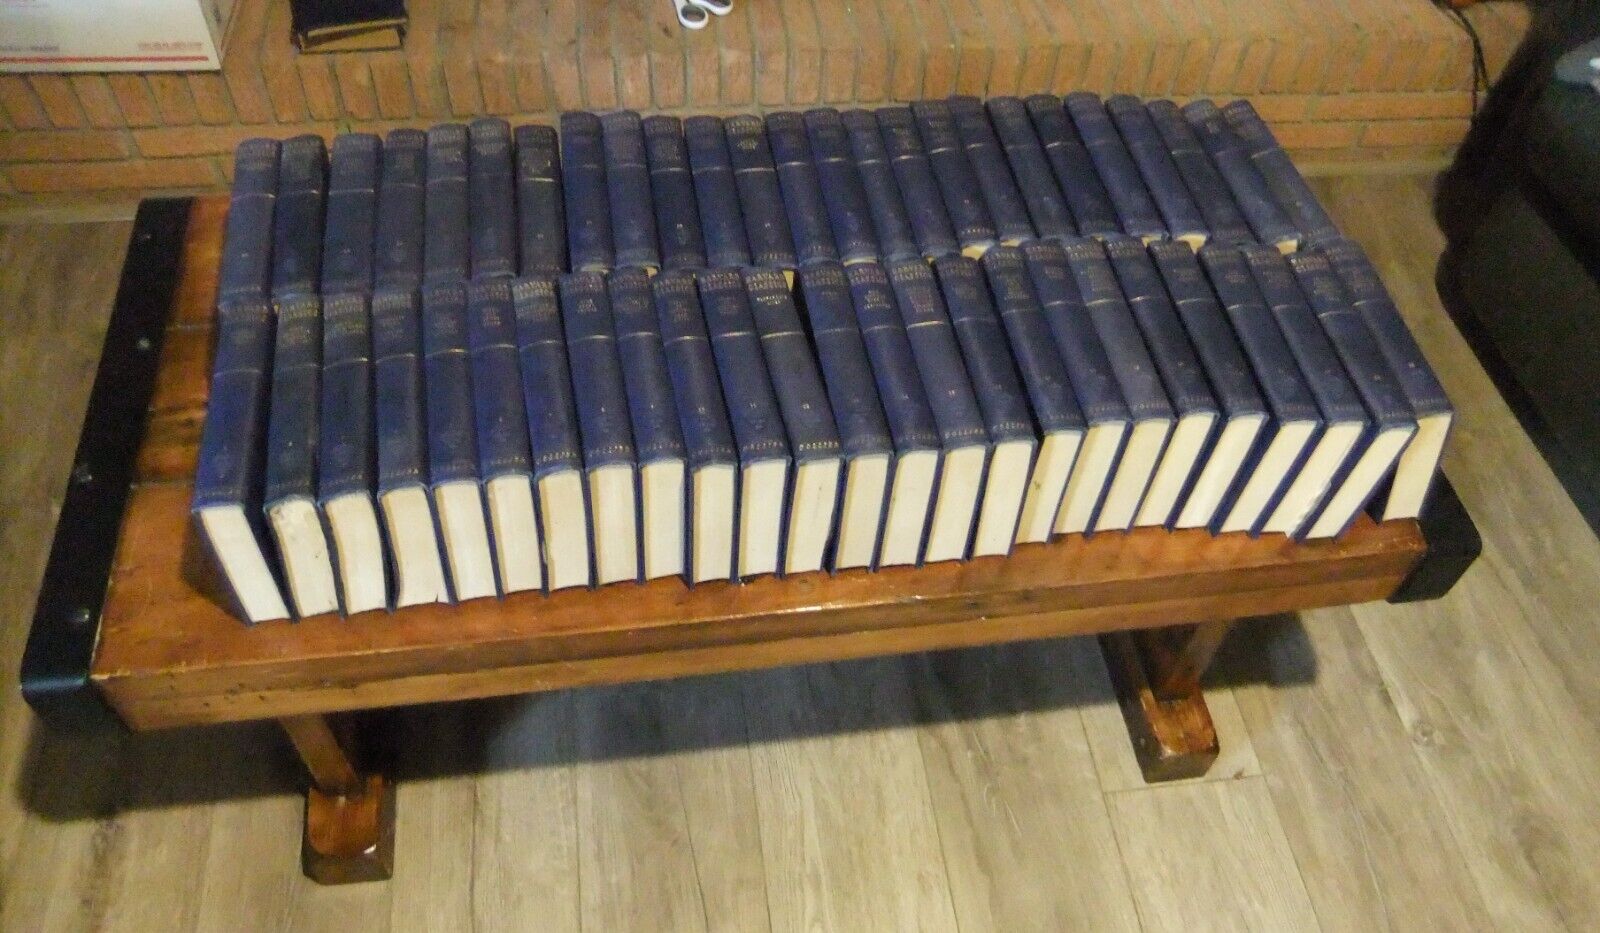 The HARVARD Classics, Complete 52 Volume Blue Set - Some w/Water Damage on Cover